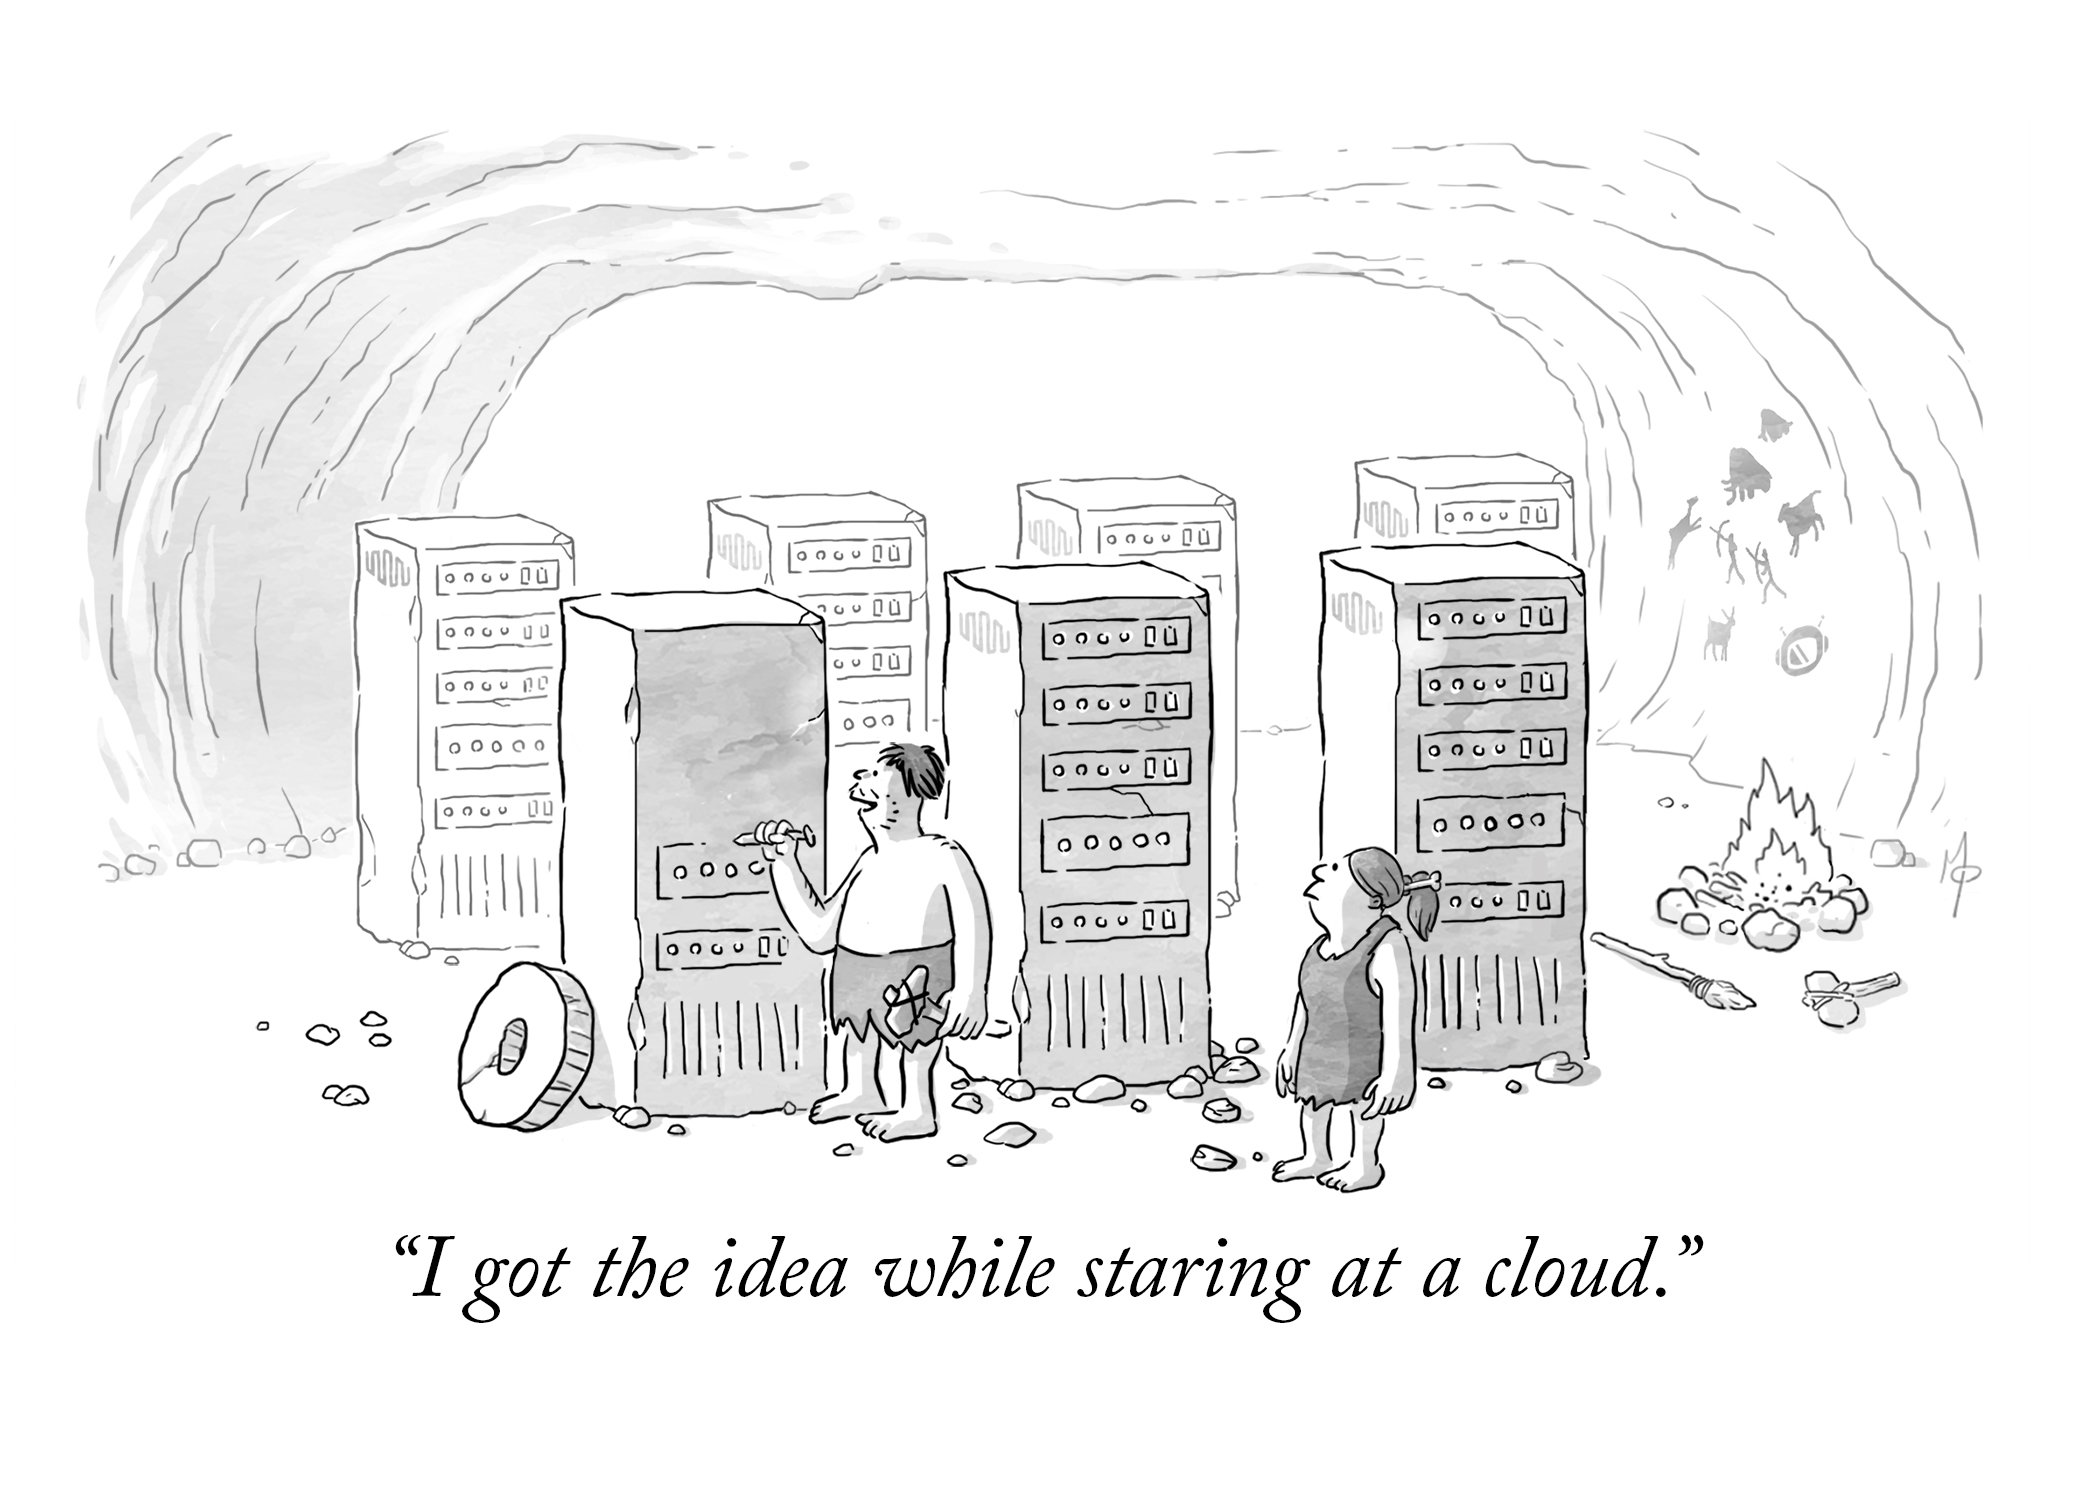 New Yorker style illustration of a caveman and woman inside a cave. The man is carving a server rack out of stone. The caption reads: I got the idea while starting at a cloud